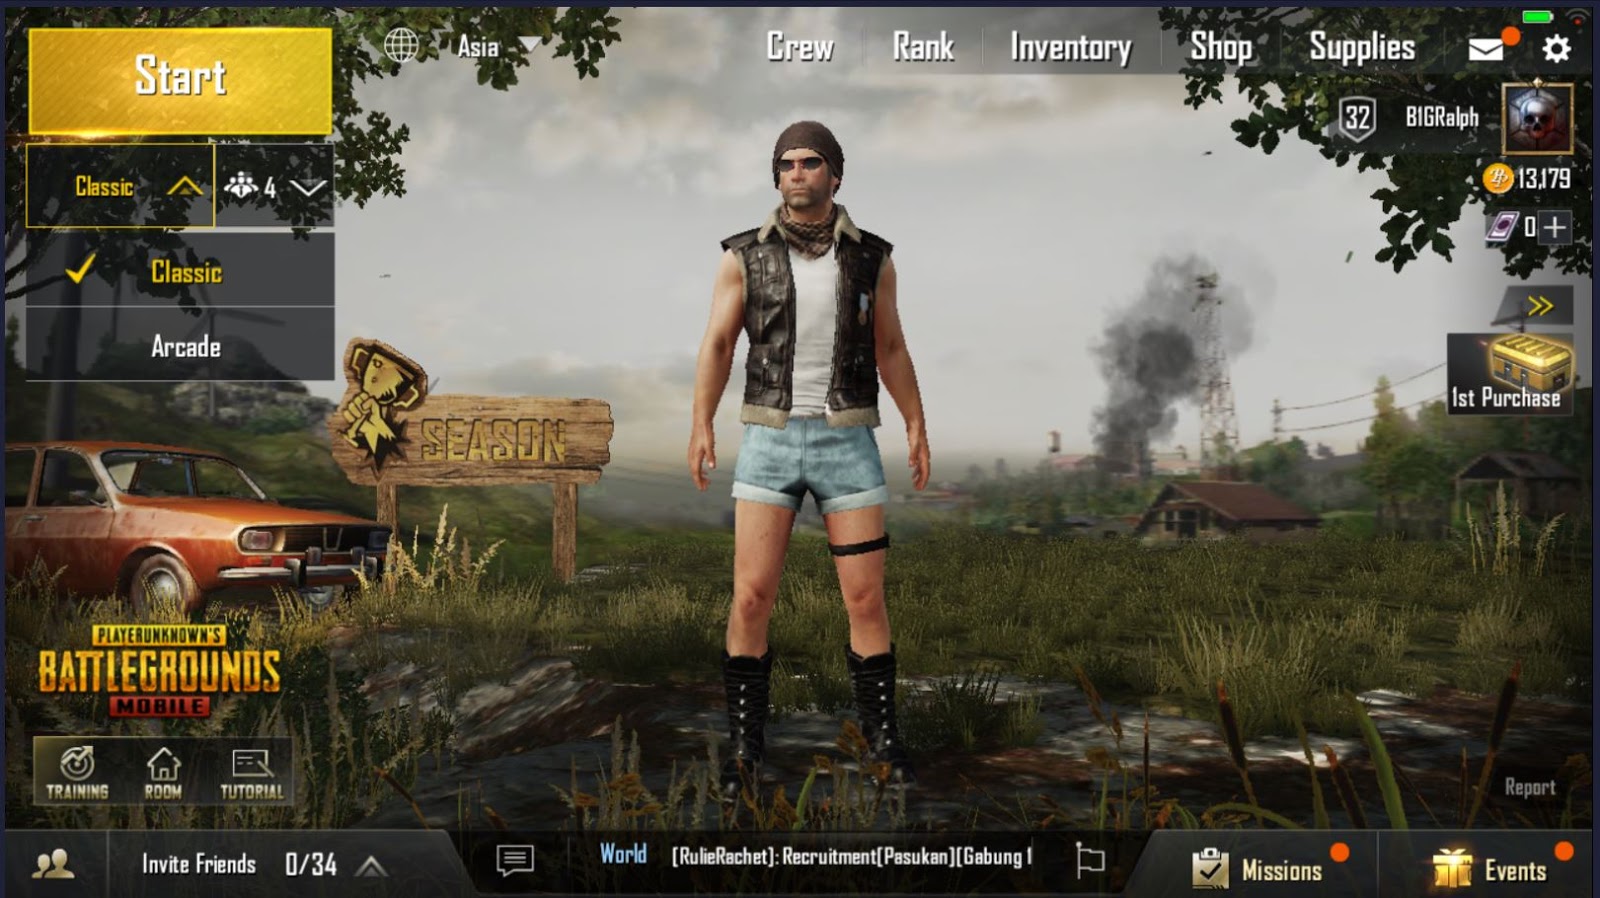 Pubg Mobile Gets Arcade Mode In Latest Update On Android Latest Tech And Gadget News Tech Gizmo Philippines